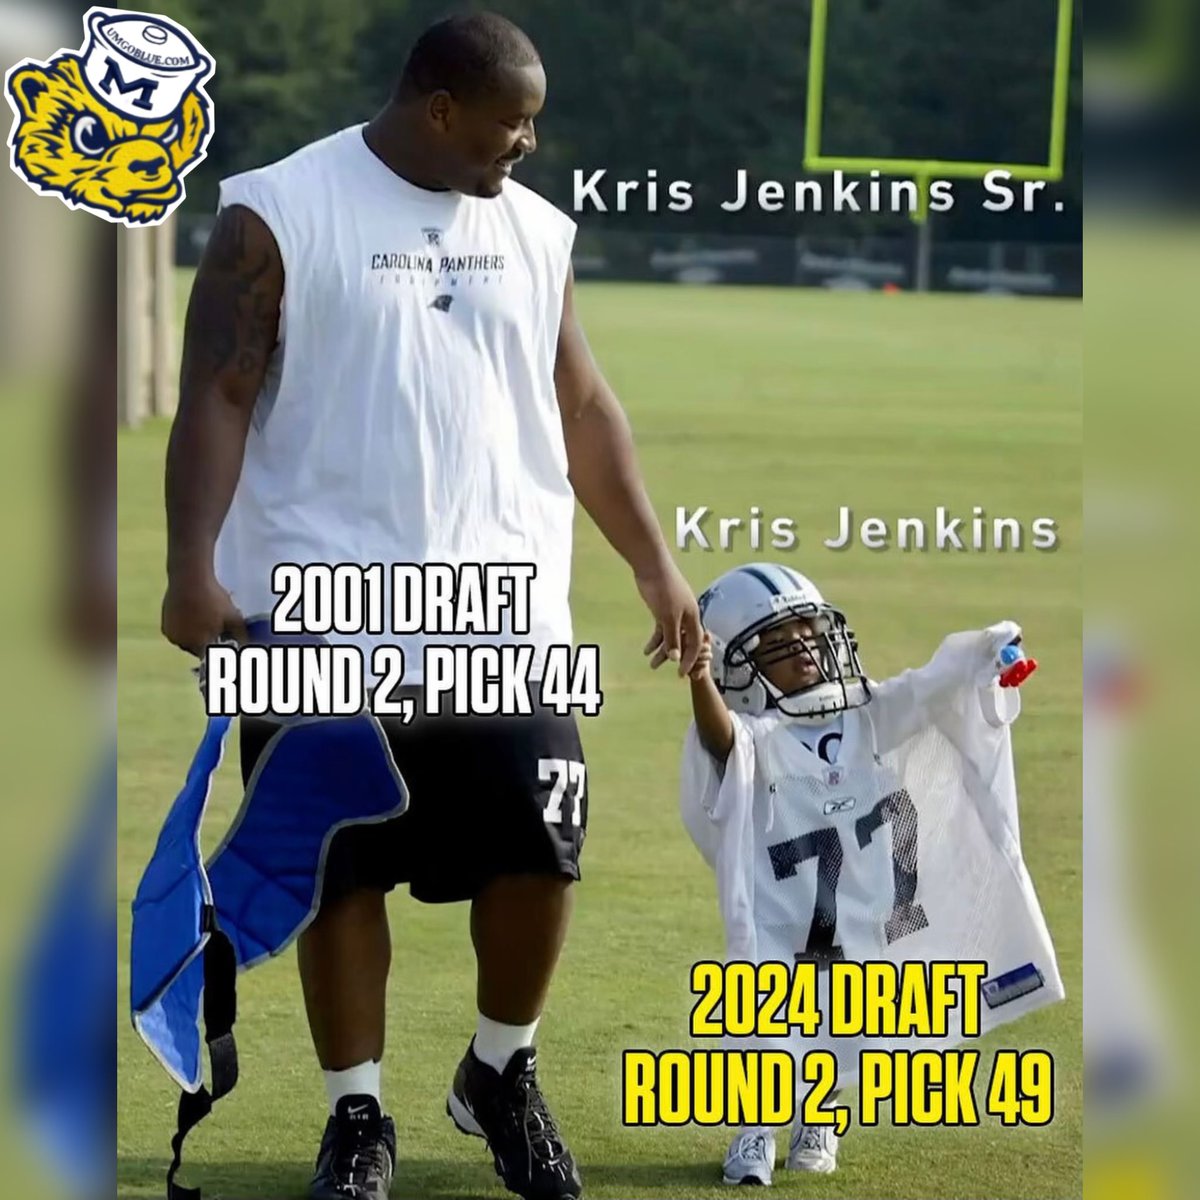 National Champion Kris Jenkins was drafted in the back of half of the second round, just like his father, to the Cincinnati Bengals. 

Kris Jenkins Sr. went on to be a 3x NFL All-Pro and Kris’ uncle, Cullen Jenkins, was a 13 year veteran that won a Super Bowl.

Kris on his dad &